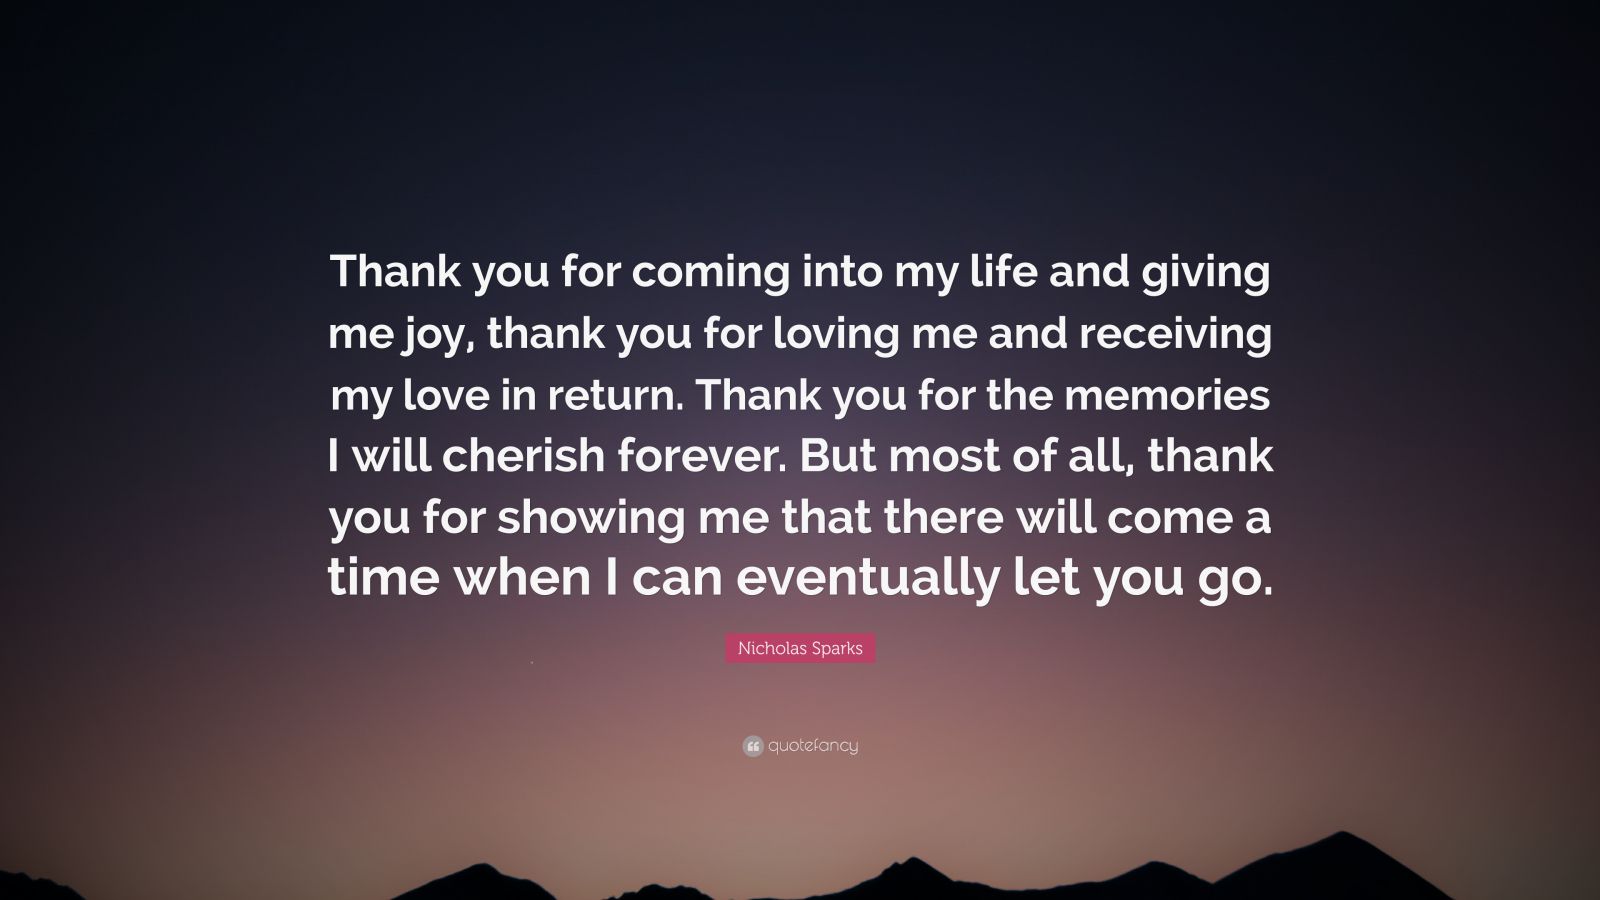 Nicholas Sparks Quote: “Thank you for coming into my life and giving me